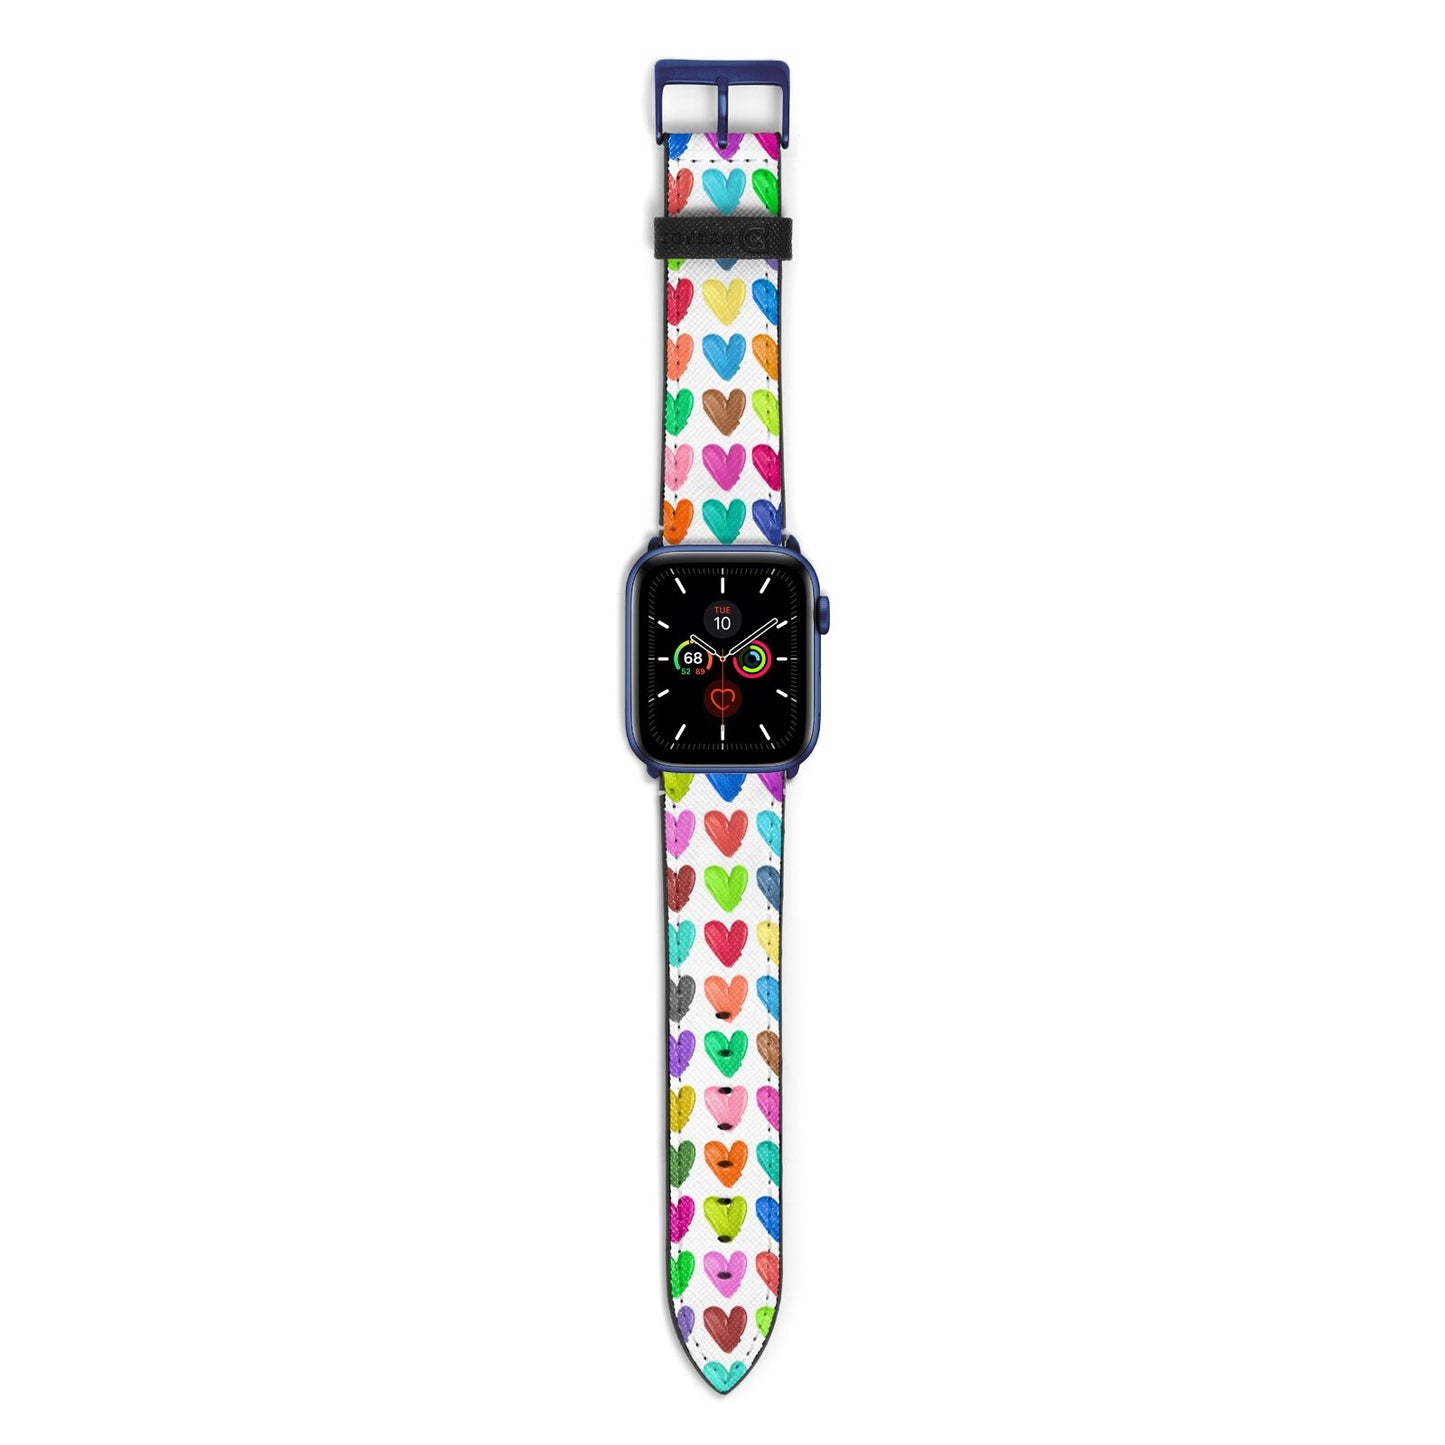 Polka Heart Apple Watch Strap with Blue Hardware